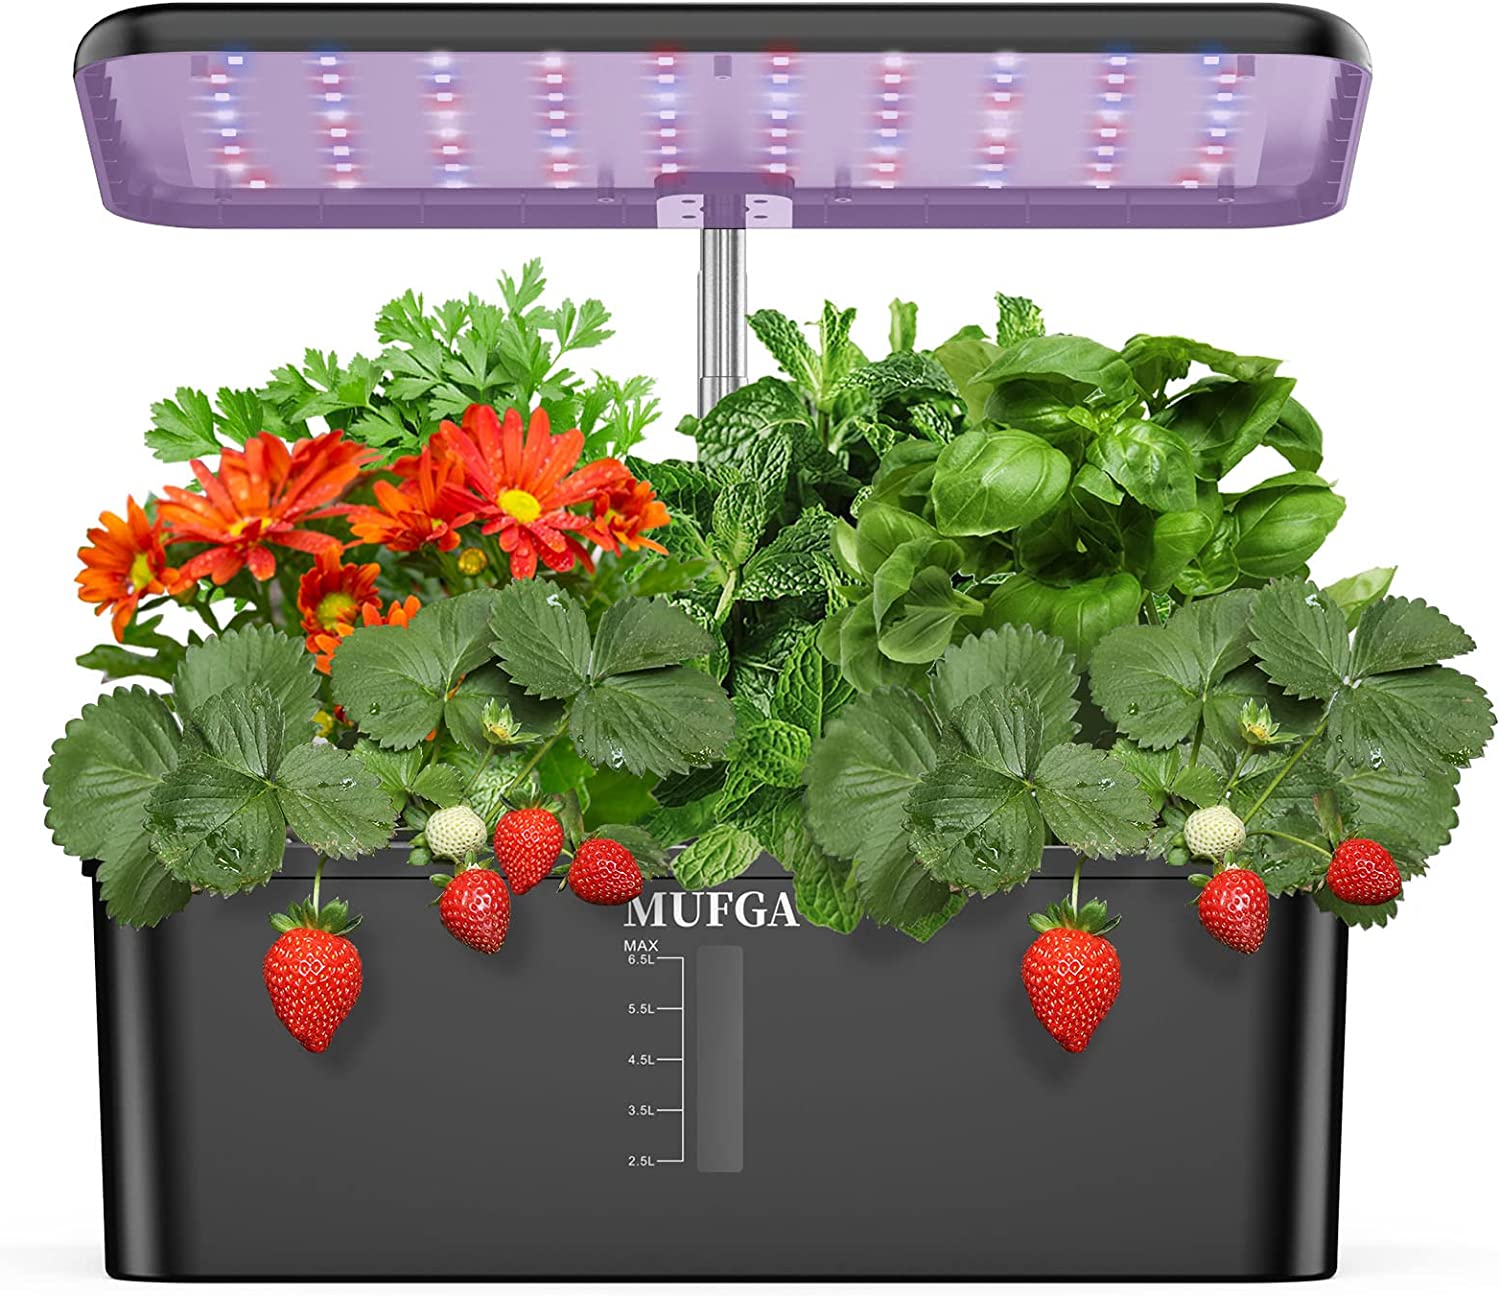 MUFGA 12 Pods Hydroponics Growing System, Indoor Garden with LED Grow Light, Plants Germination Kit, Mini Herb Garden with Pump System, Height Adjustable (No Seed), Ideal Gardening Gifts for Women